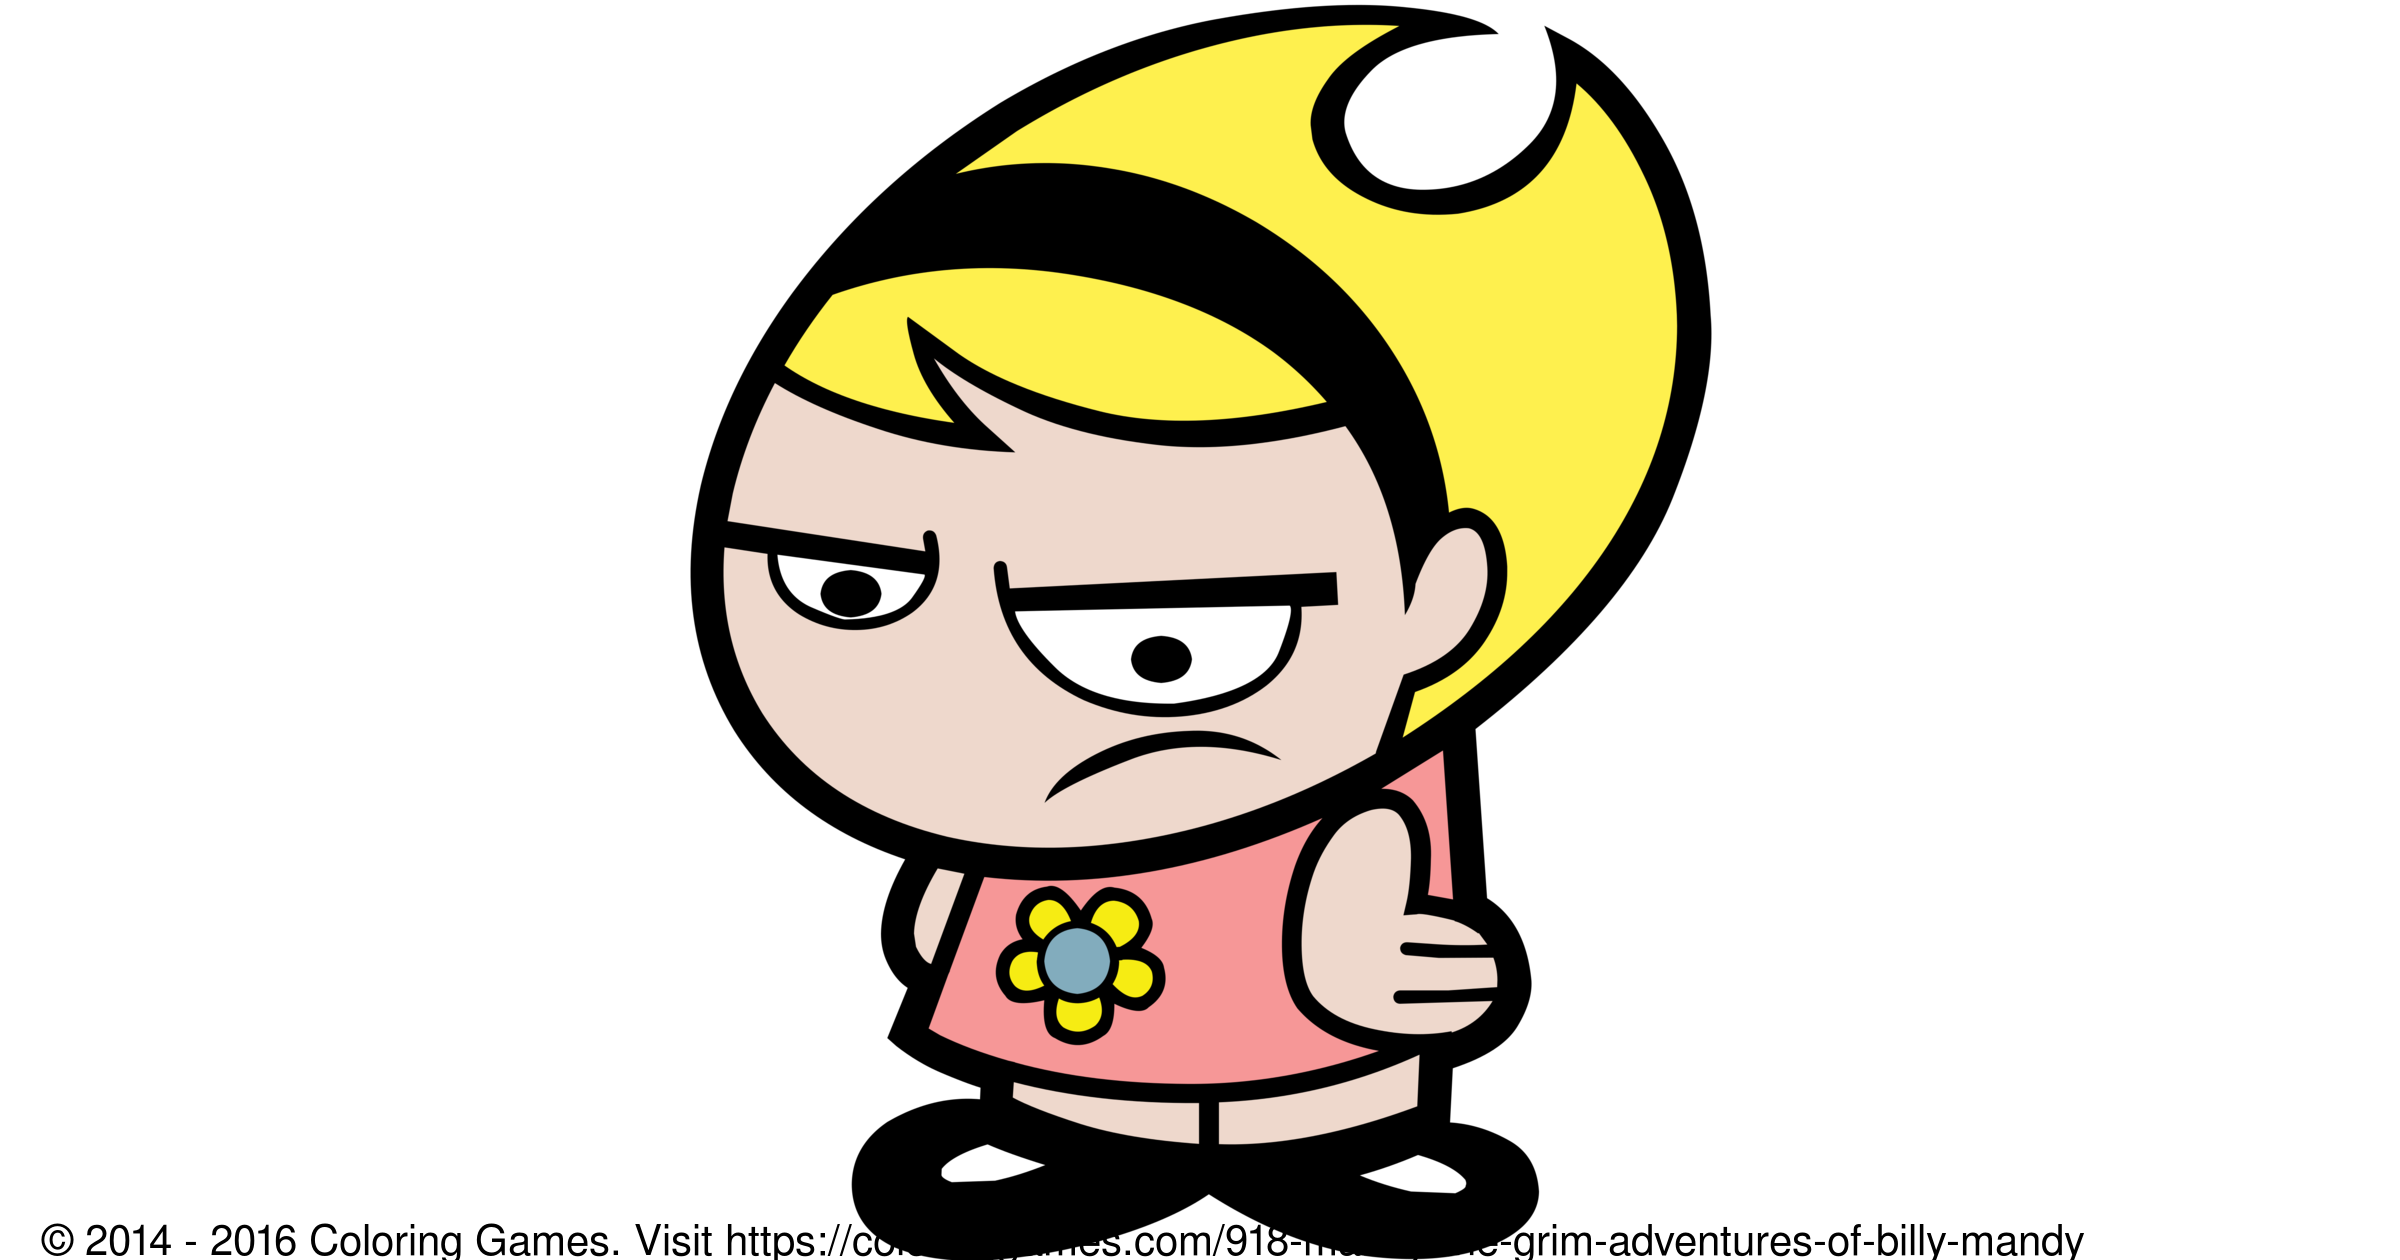 Mandy (The Grim Adventures of Billy & Mandy) - Coloring Games and